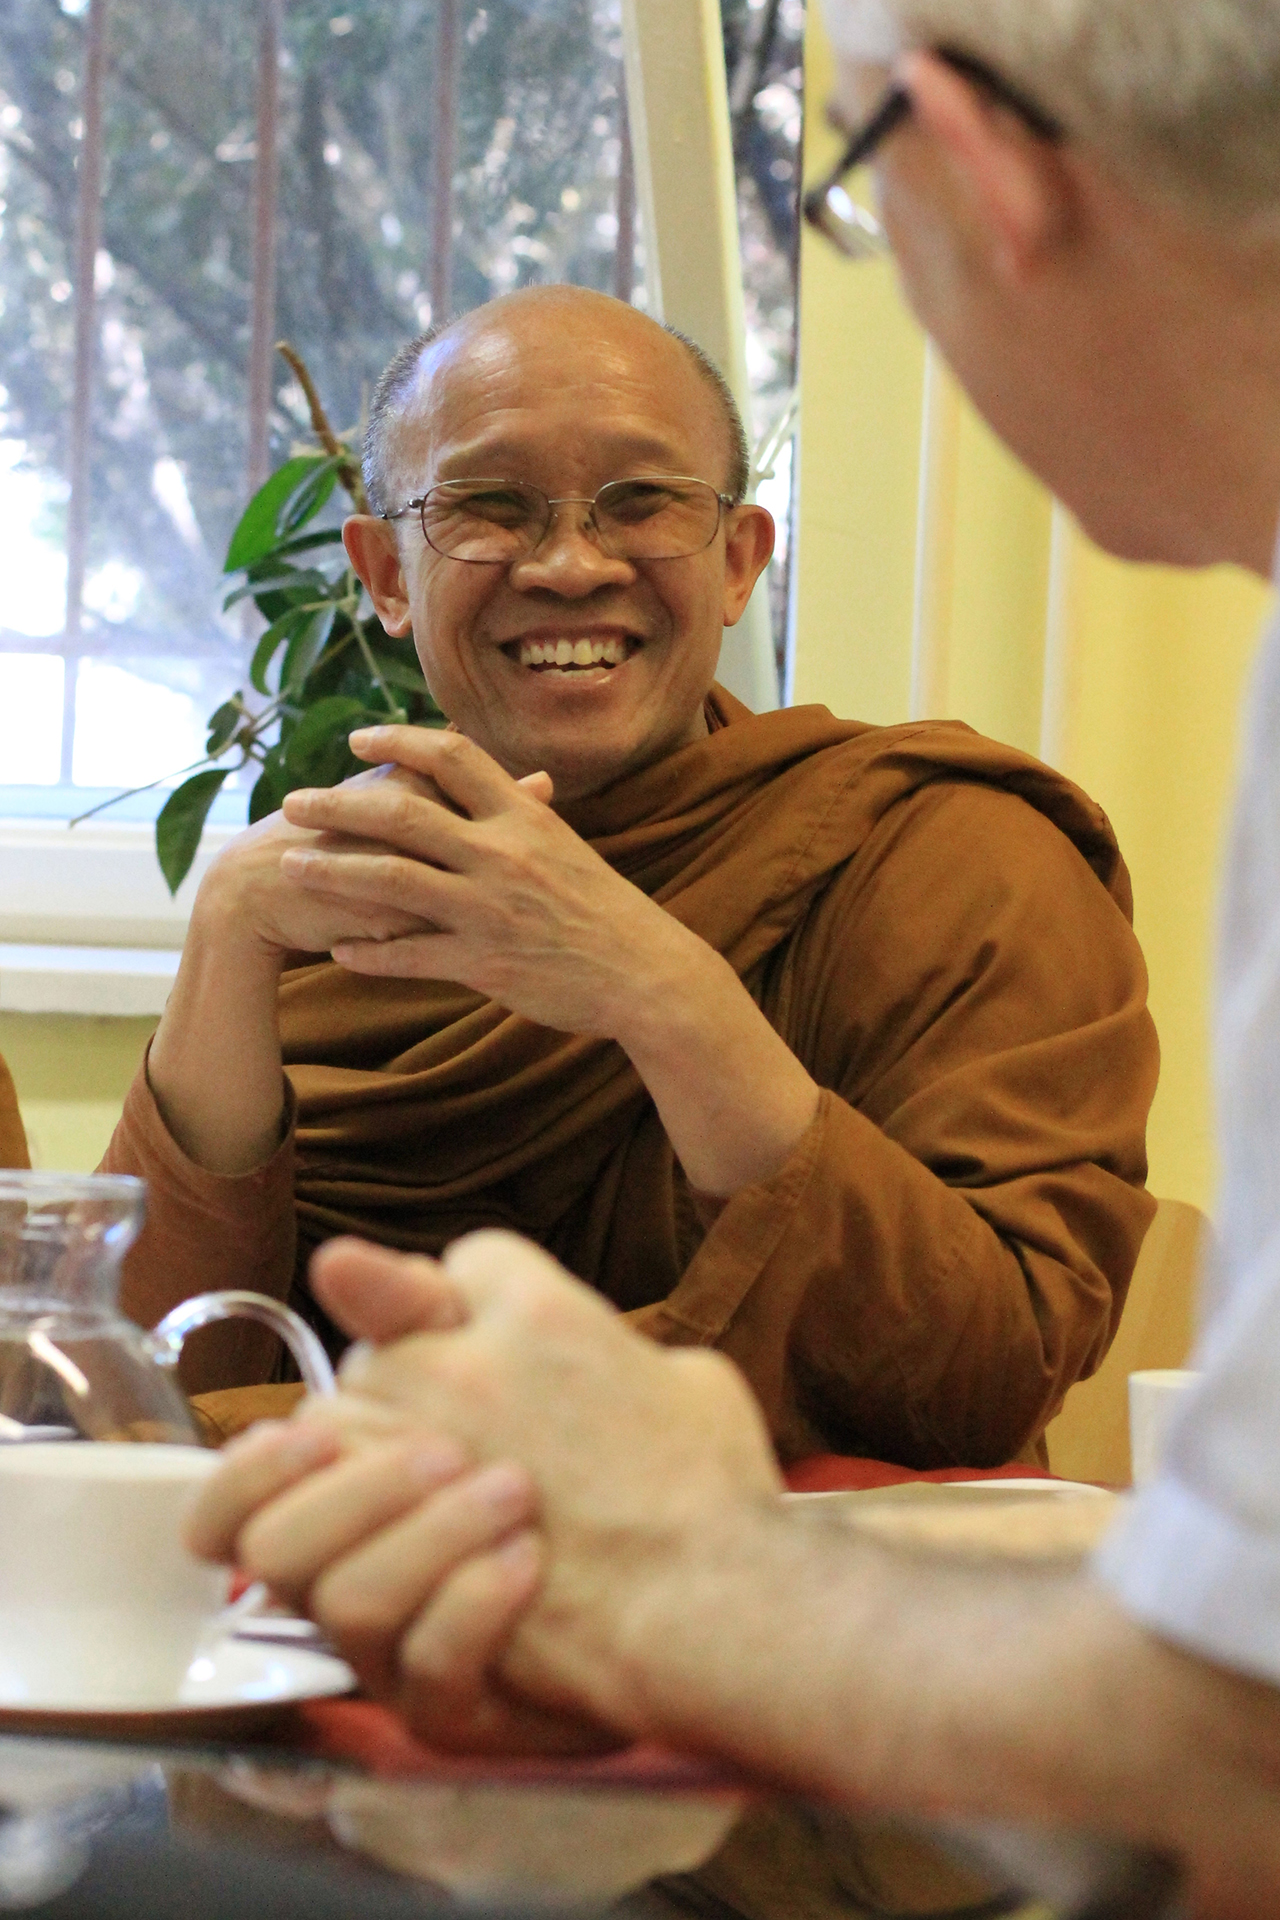 Thai monks visited us with the leaders of a monastery building foundation.